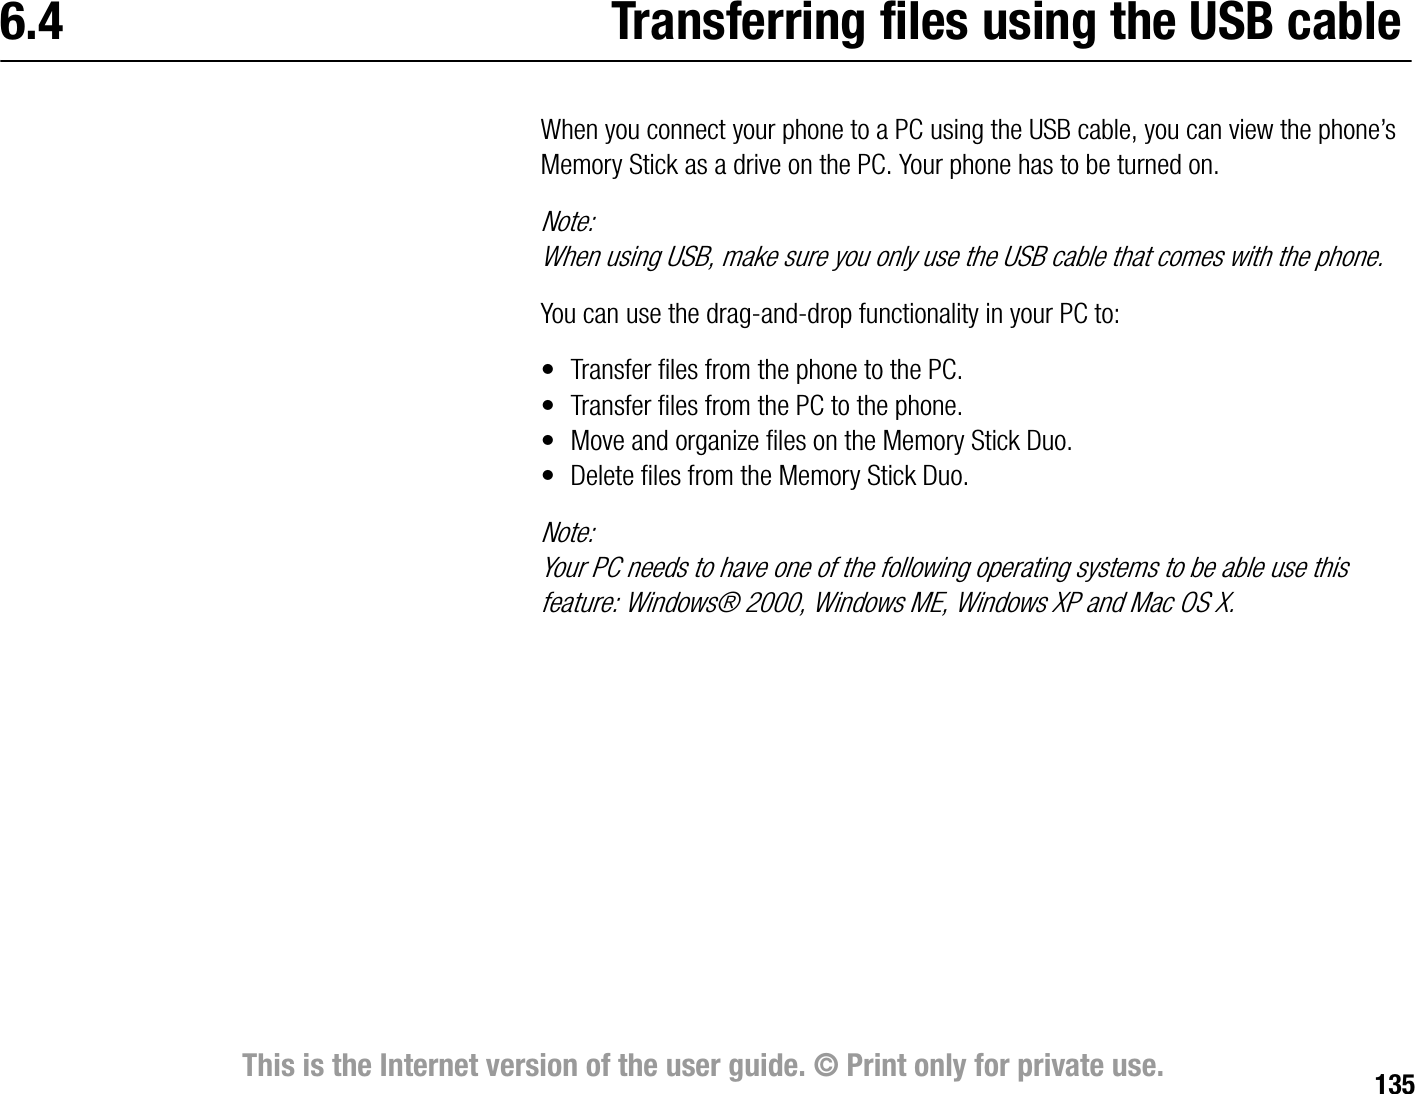 135This is the Internet version of the user guide. © Print only for private use.6.4 Transferring files using the USB cableWhen you connect your phone to a PC using the USB cable, you can view the phone’s Memory Stick as a drive on the PC. Your phone has to be turned on.Note:When using USB, make sure you only use the USB cable that comes with the phone.You can use the draganddrop functionality in your PC to:• Transfer files from the phone to the PC.• Transfer files from the PC to the phone.• Move and organize files on the Memory Stick Duo.• Delete files from the Memory Stick Duo.Note:Your PC needs to have one of the following operating systems to be able use this feature: Windows® 2000, Windows ME, Windows XP and Mac OS X.